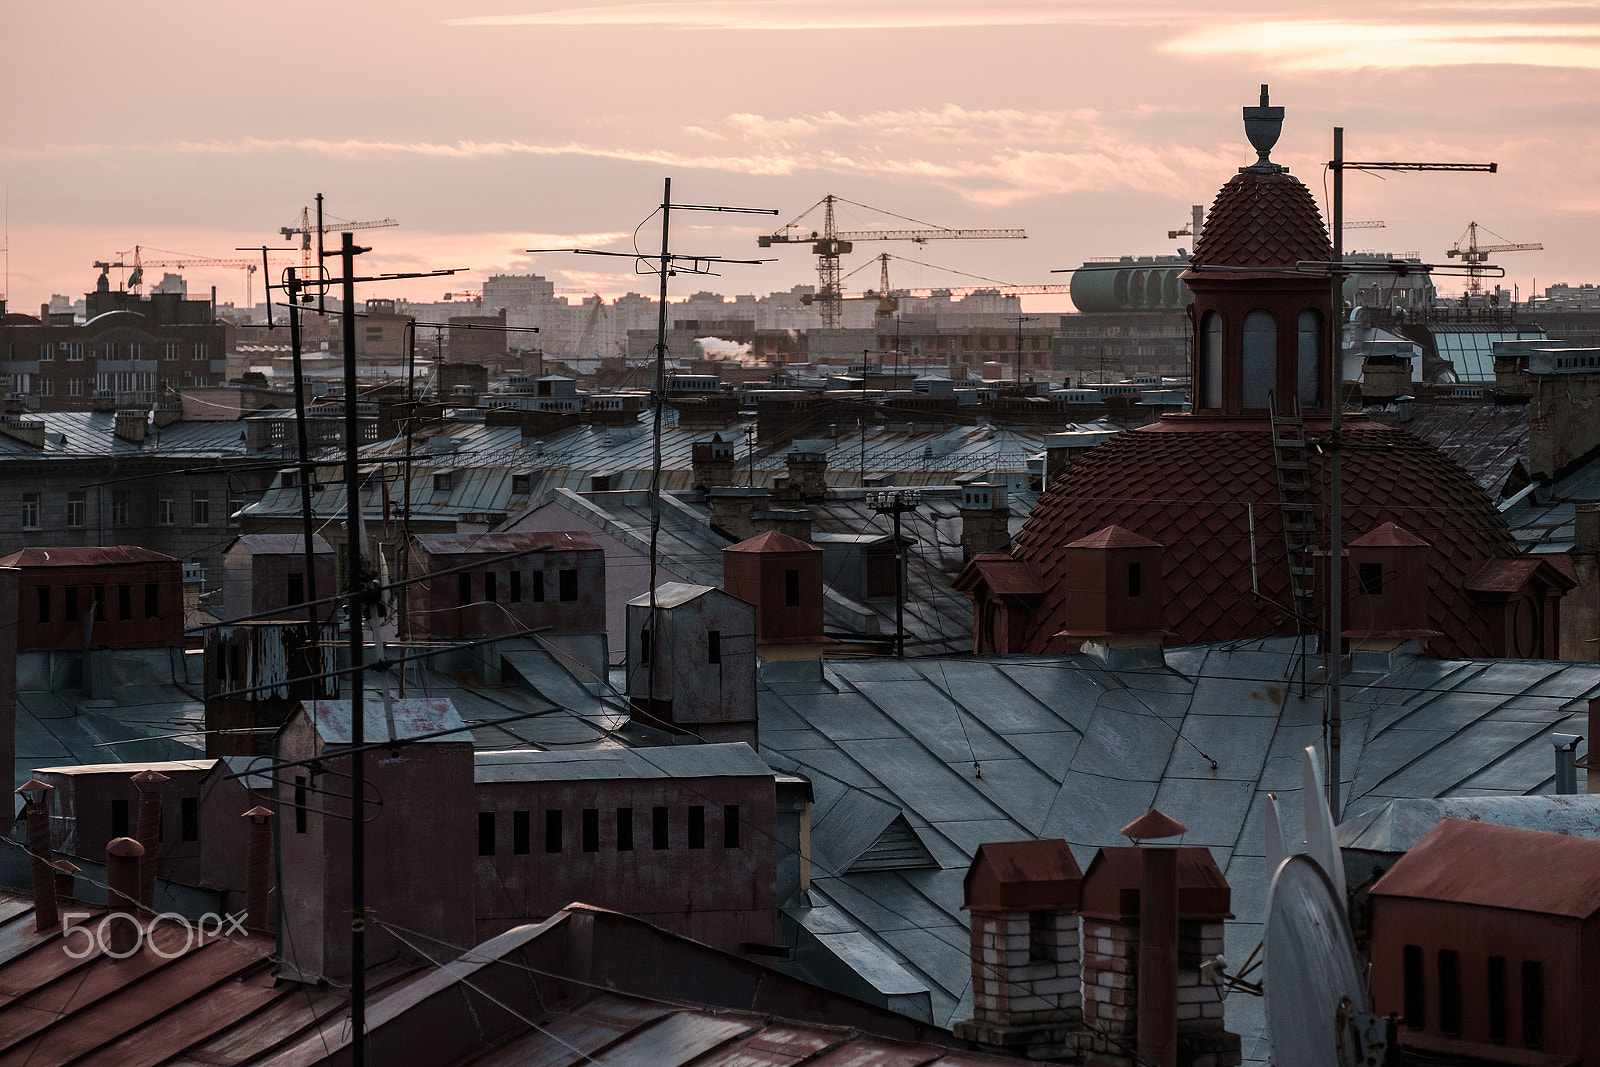 Fujifilm X-T20 sample photo. The view from the roofs in saint petersburg photography